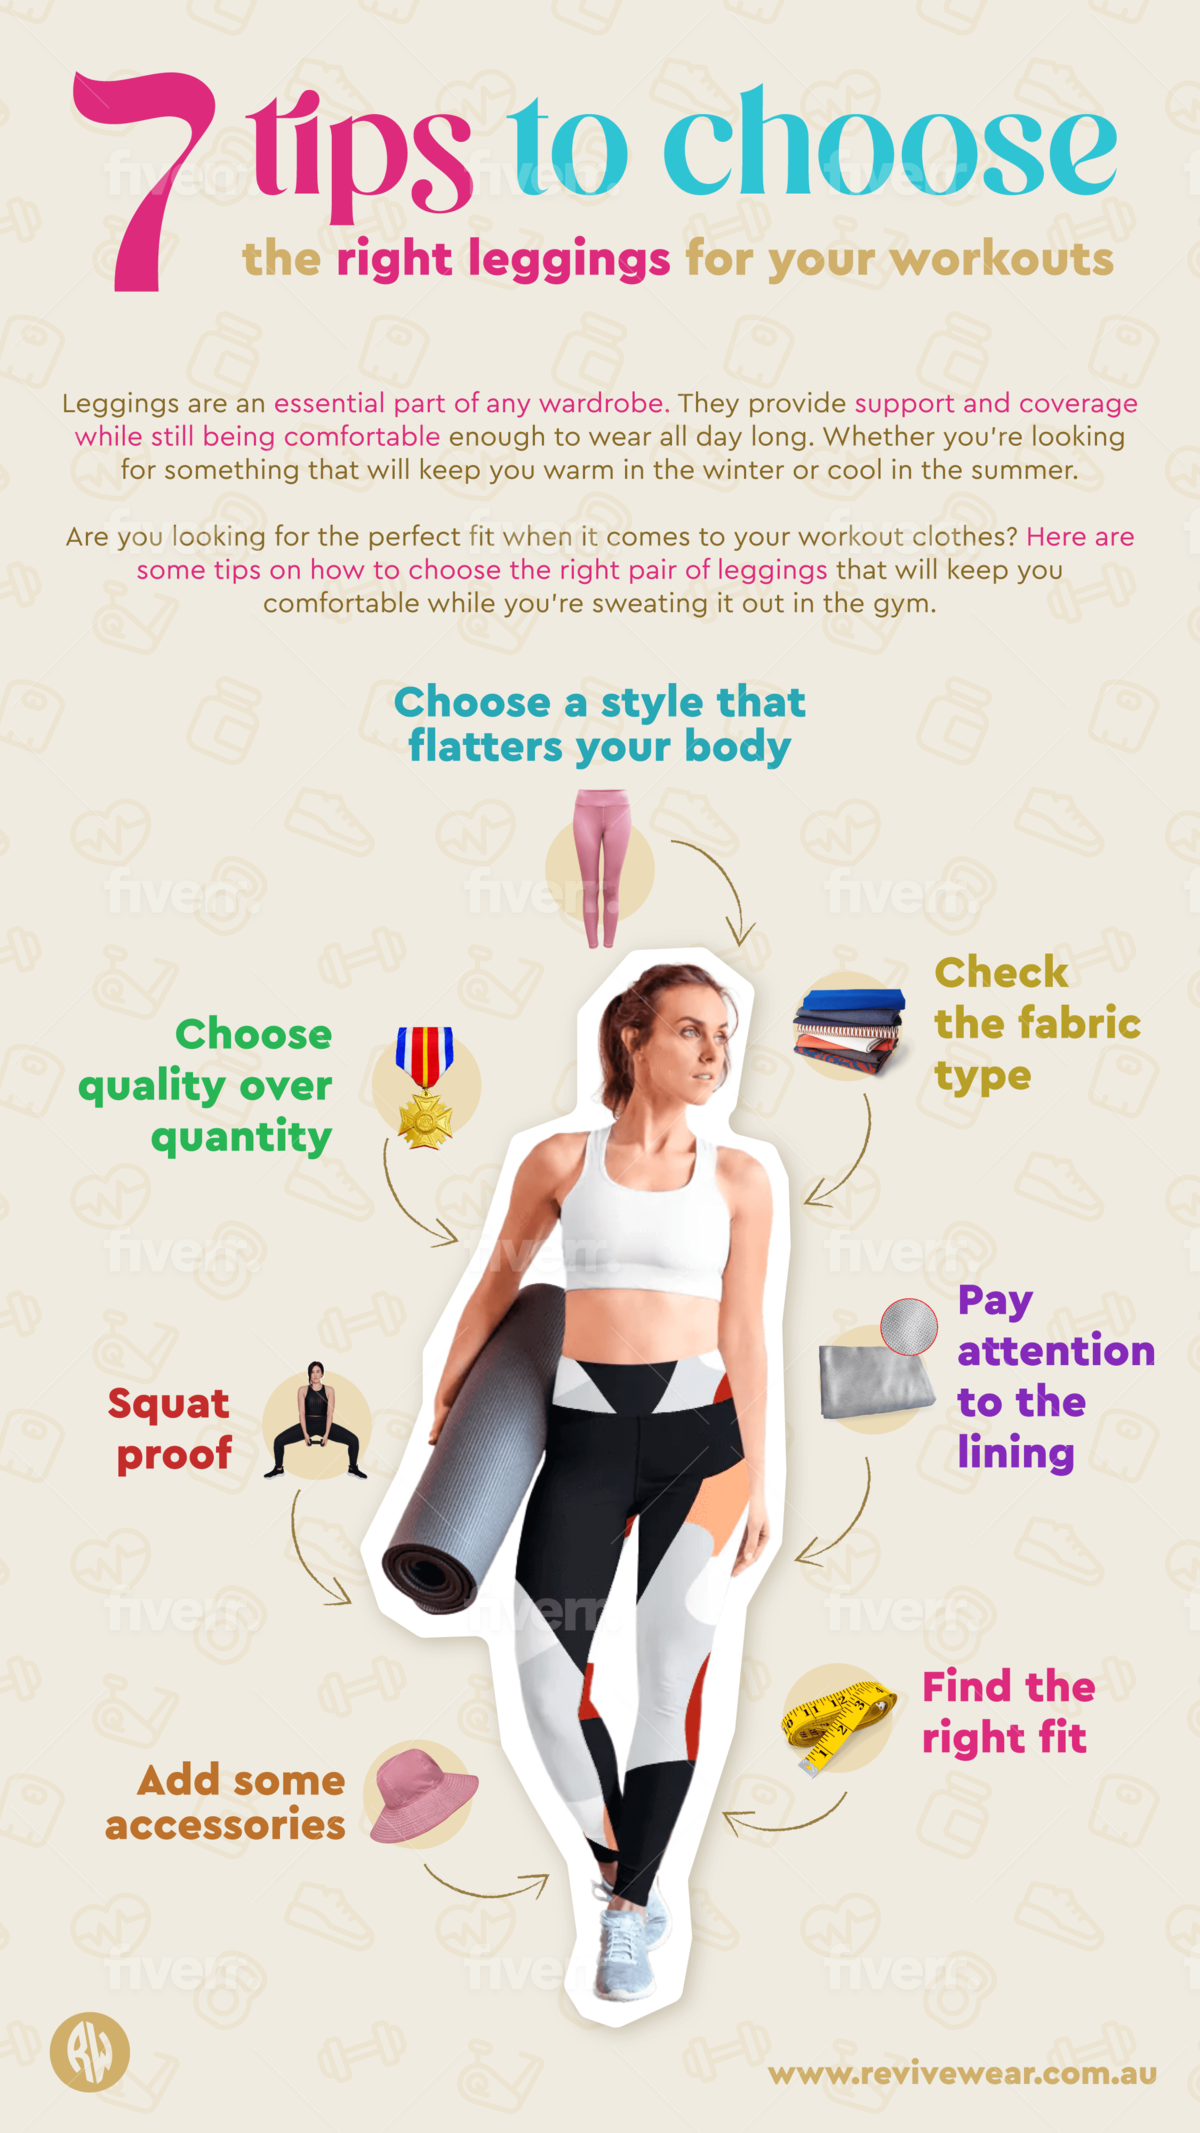 Gym outfits for Women: How To Pick Your Gym Outfit To Look Your